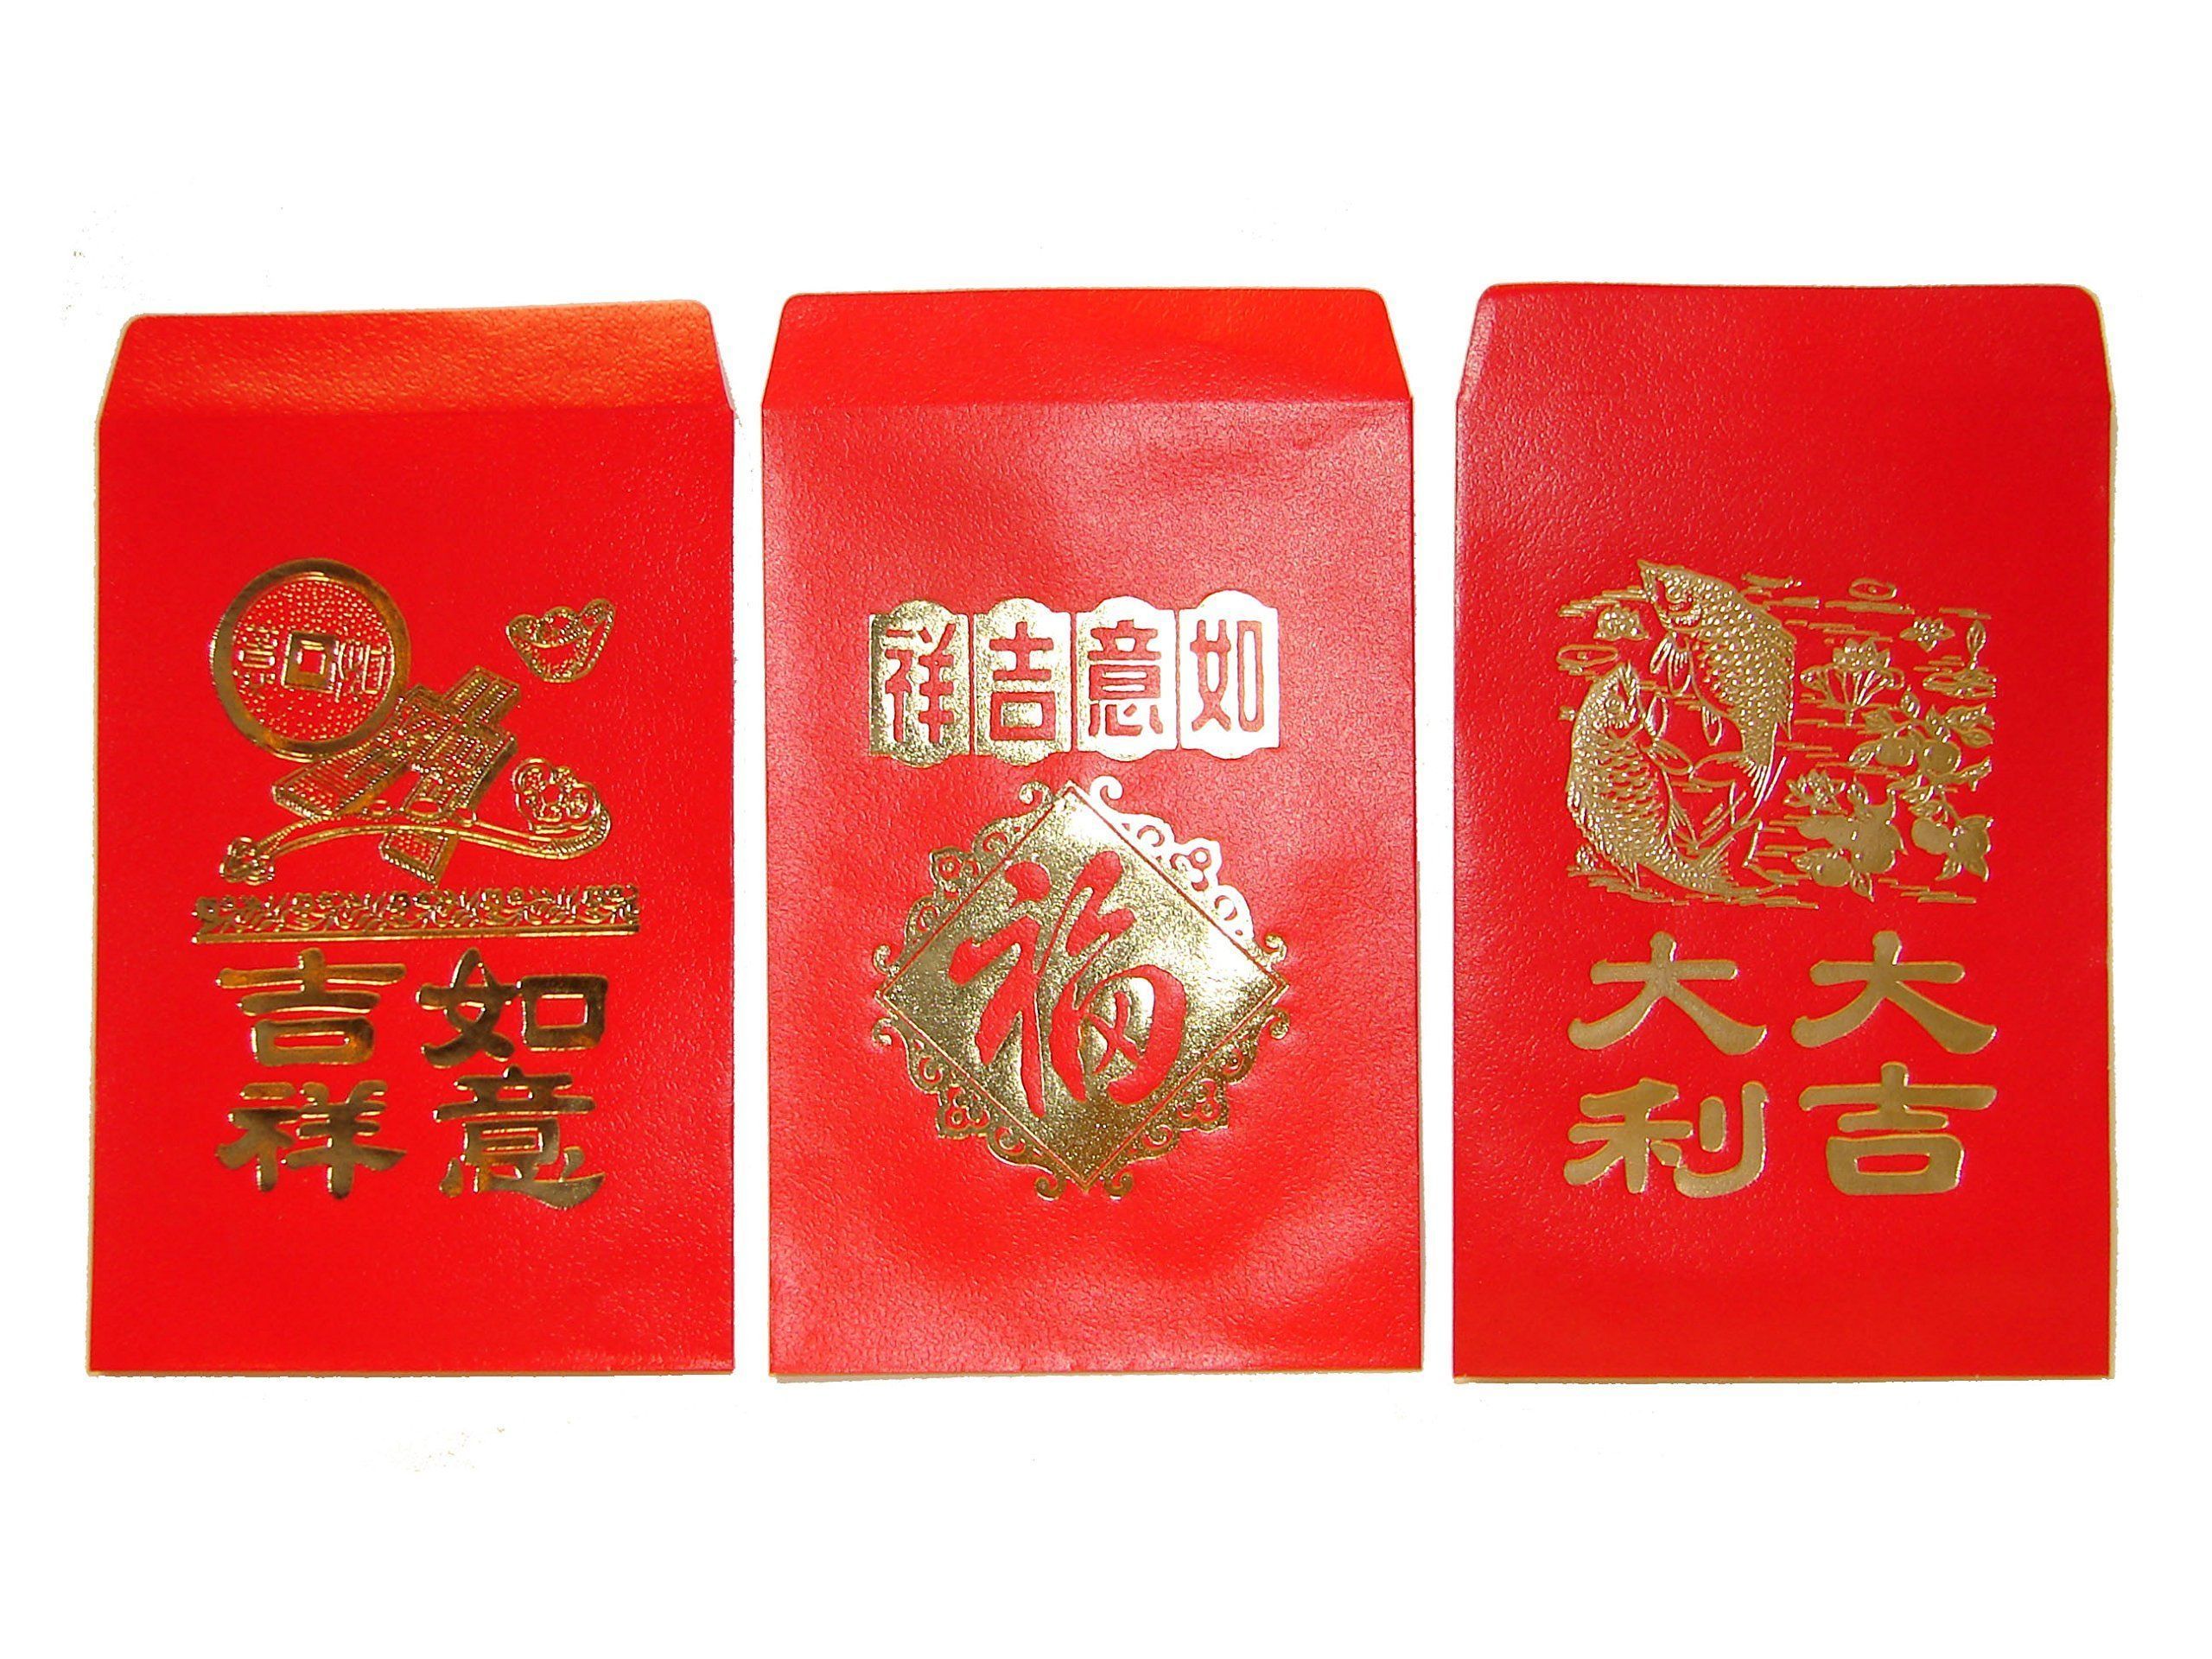 Asian red envelope history